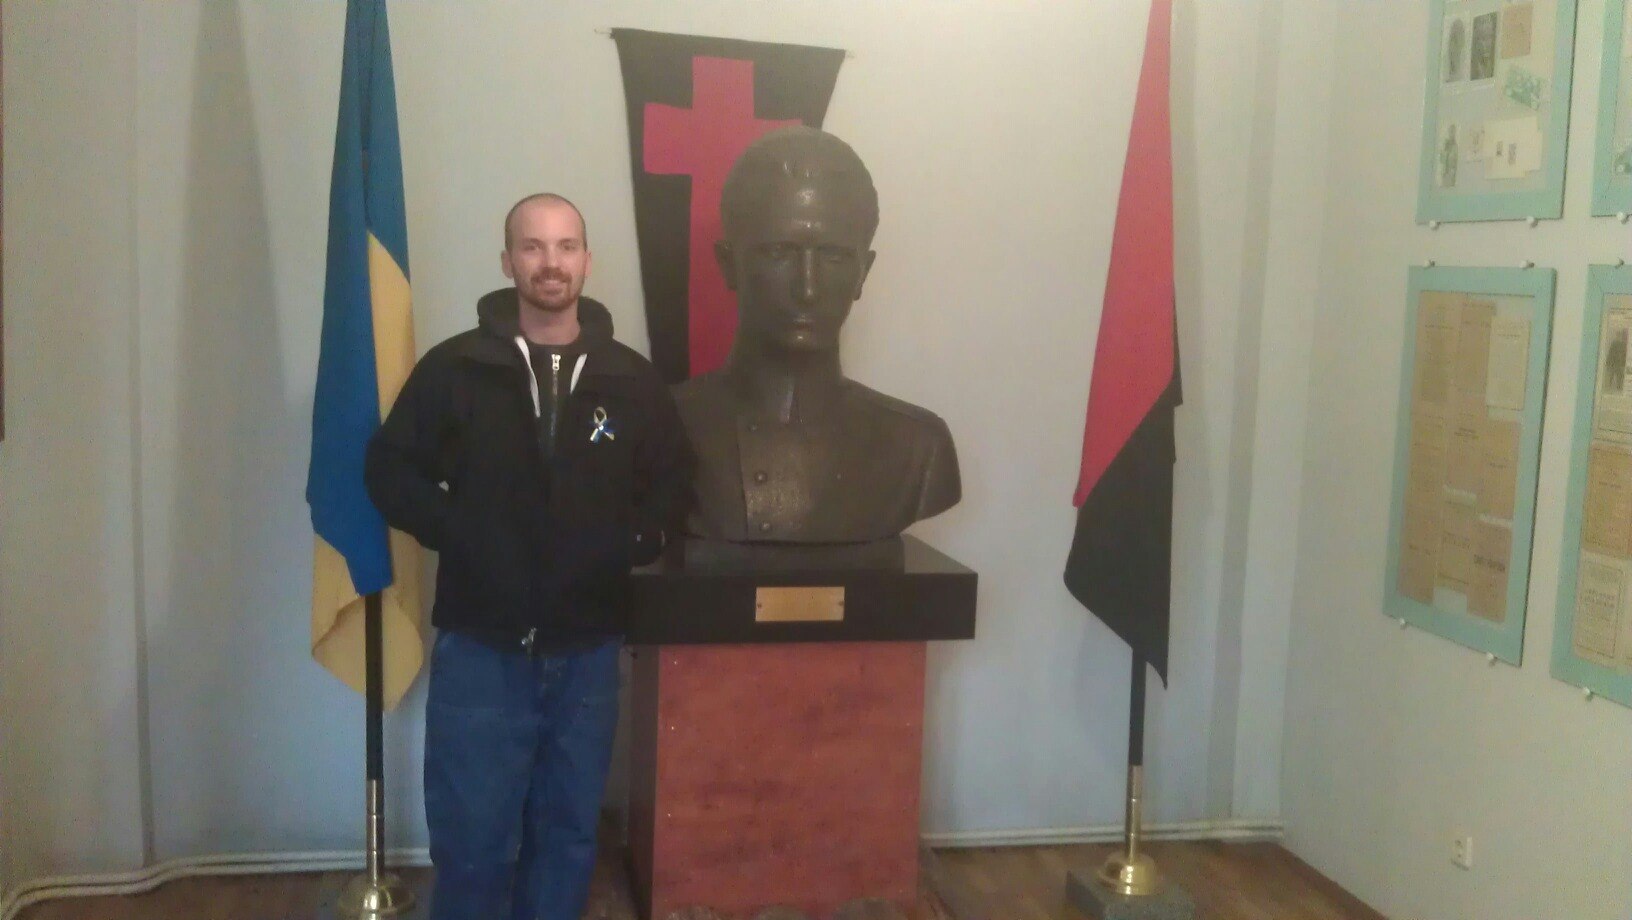 Frank Bagley pictured with a bust of Roman Shukhevych at a museum in Lviv.